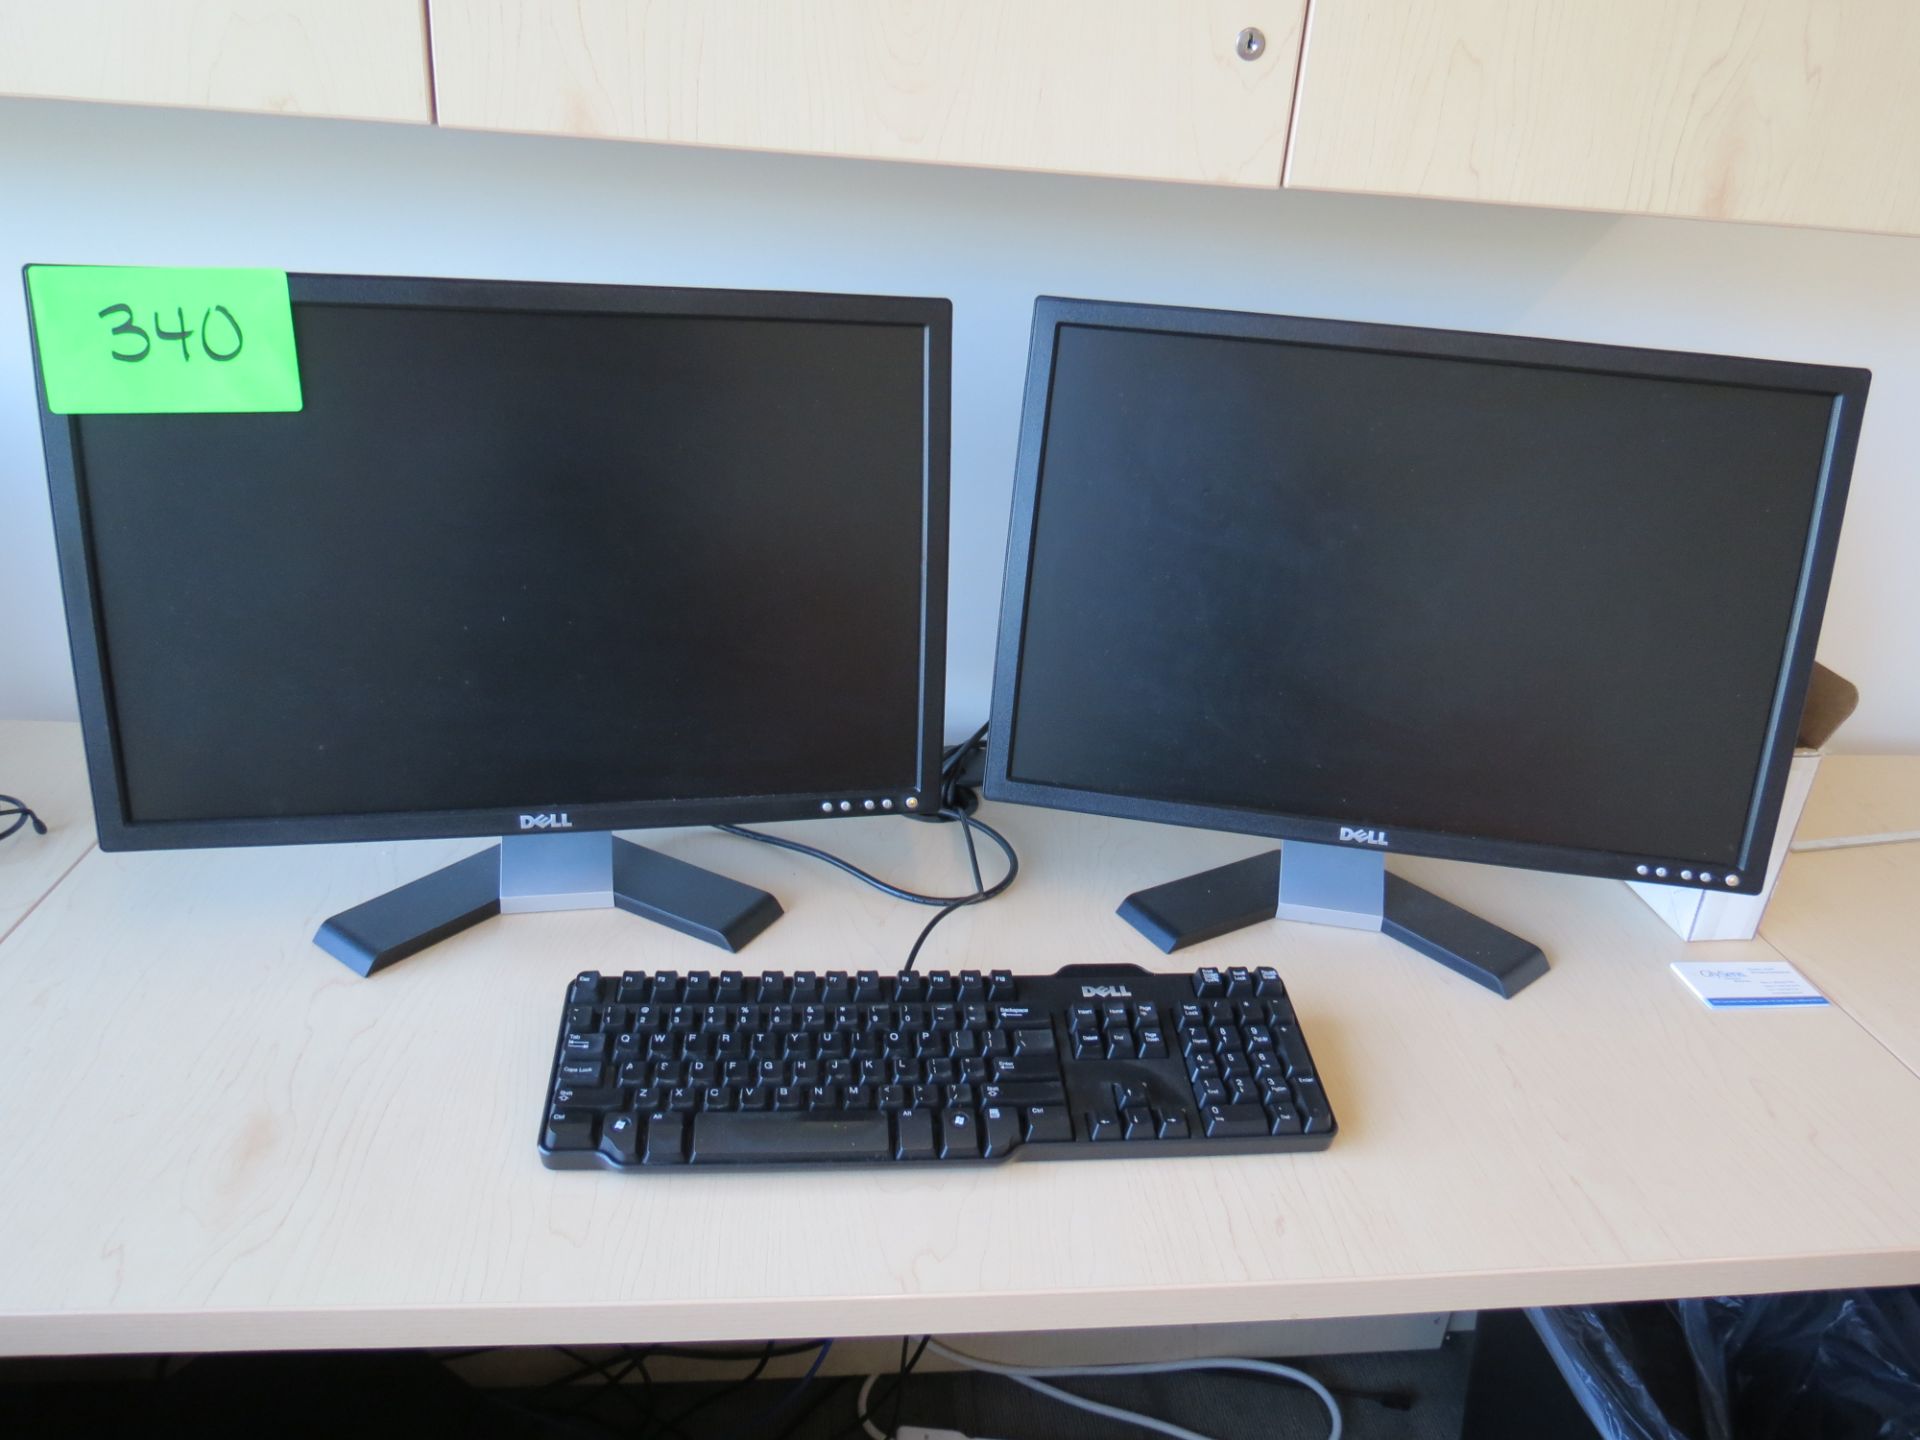 LENOVO THINKCENTRE DESKTOP /W DUAL MONITORS, KEYBOARD (SUBJECT TO CONFIRMATION) - Image 2 of 3